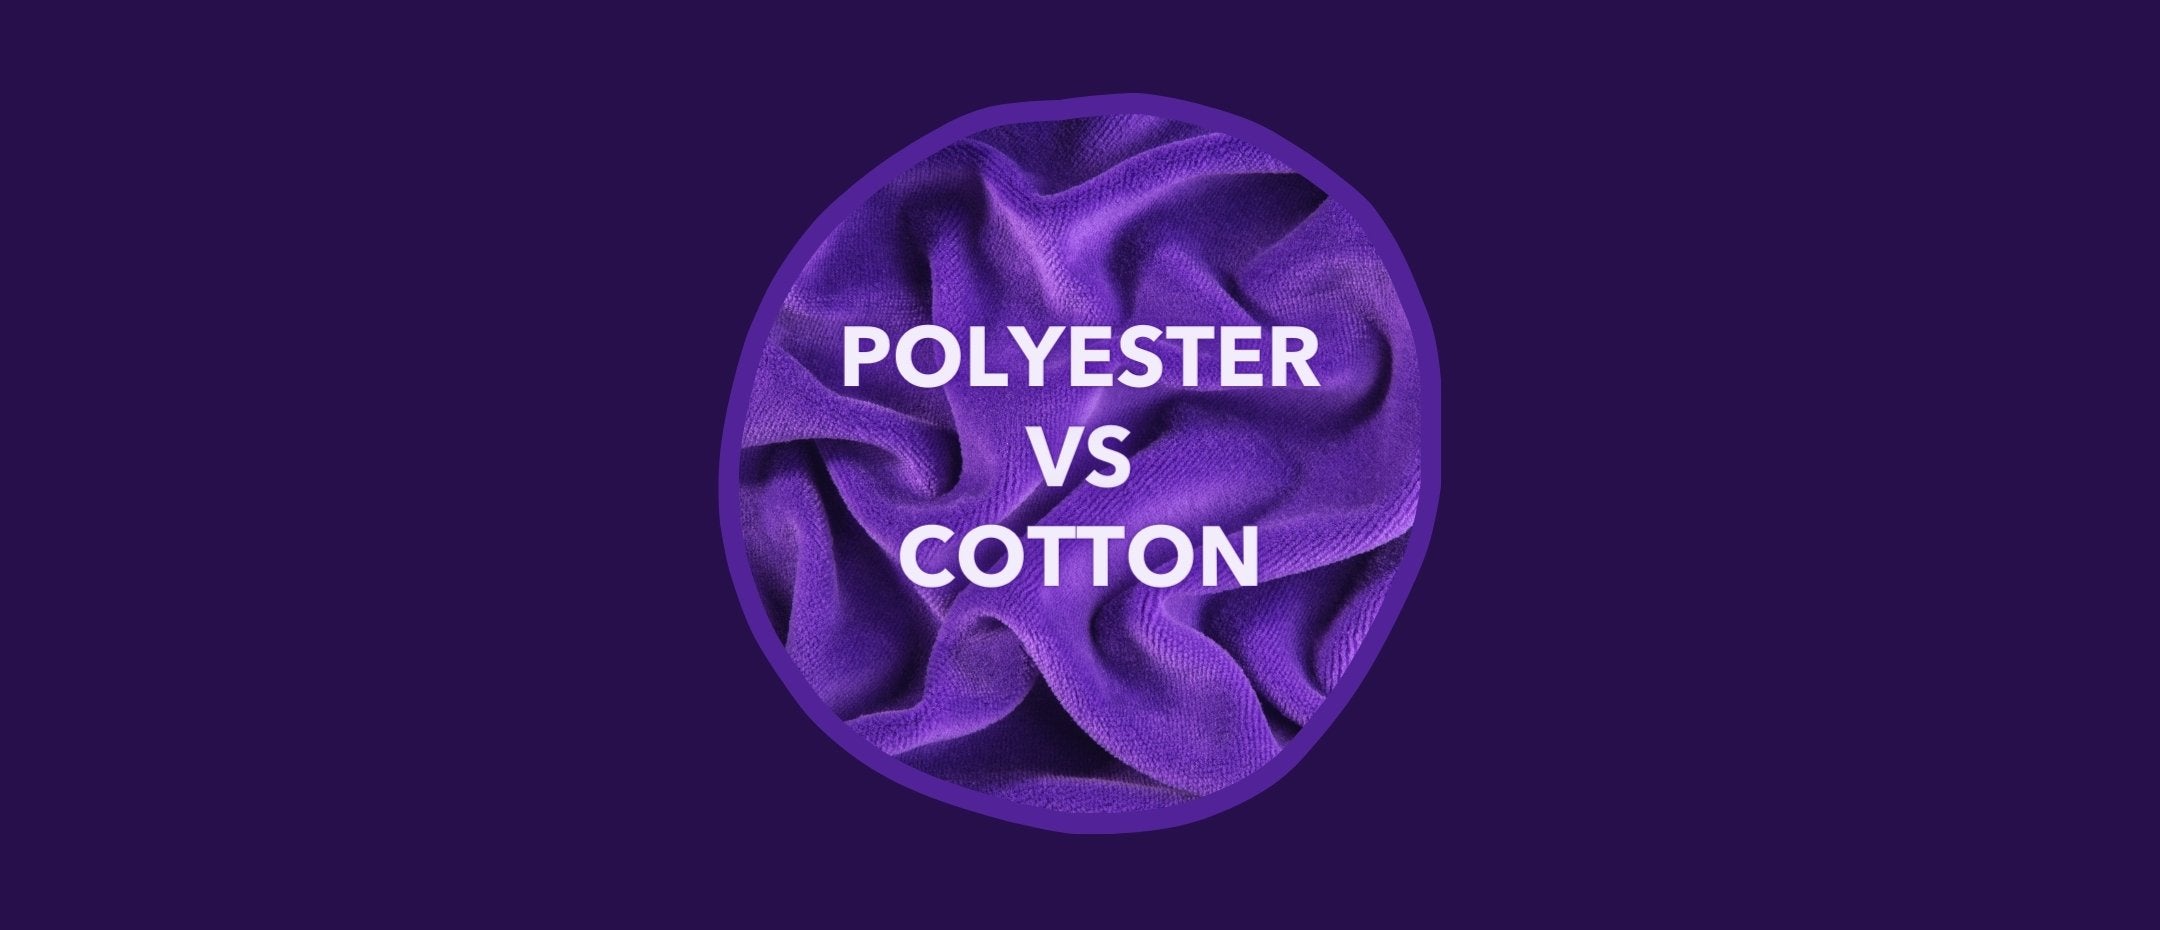 POLYESTER VS COTTON sheets on a purple background